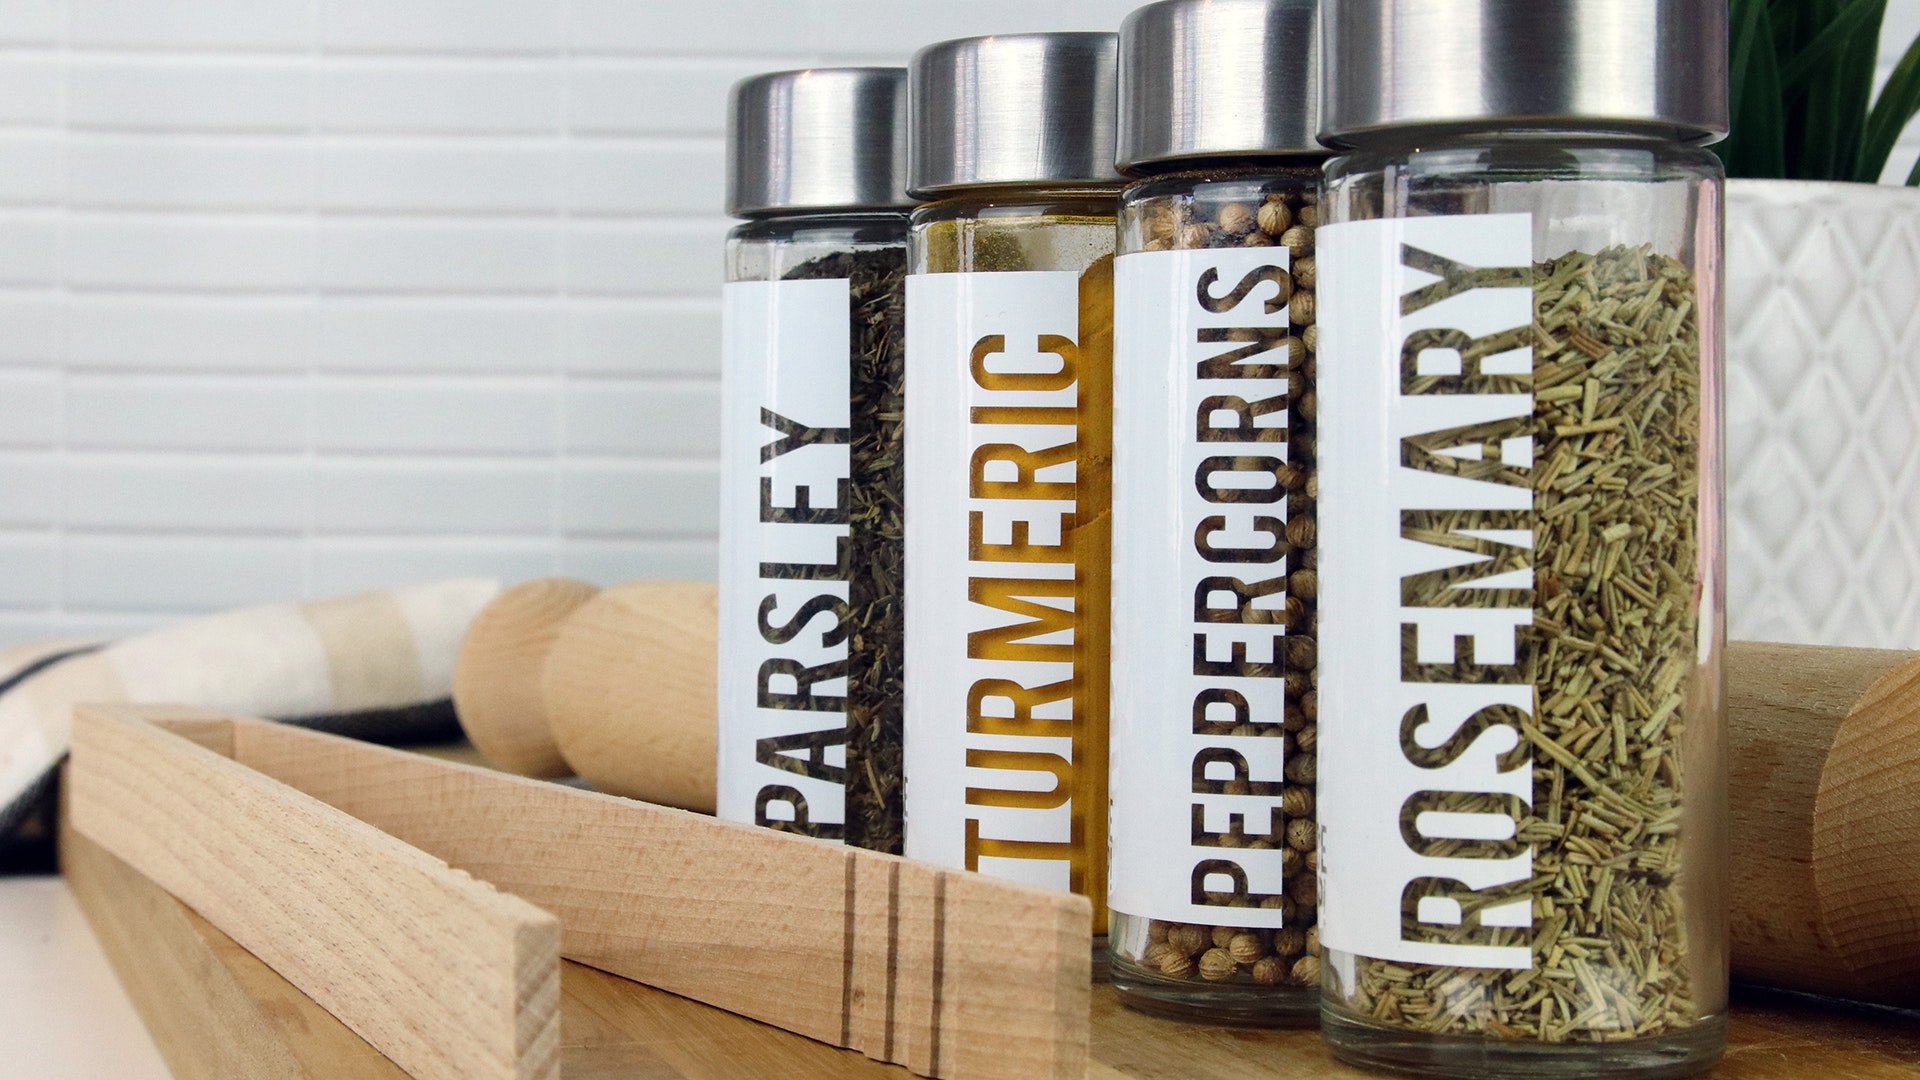 Rectangle clear labels applied to four spice jars filled with different spices